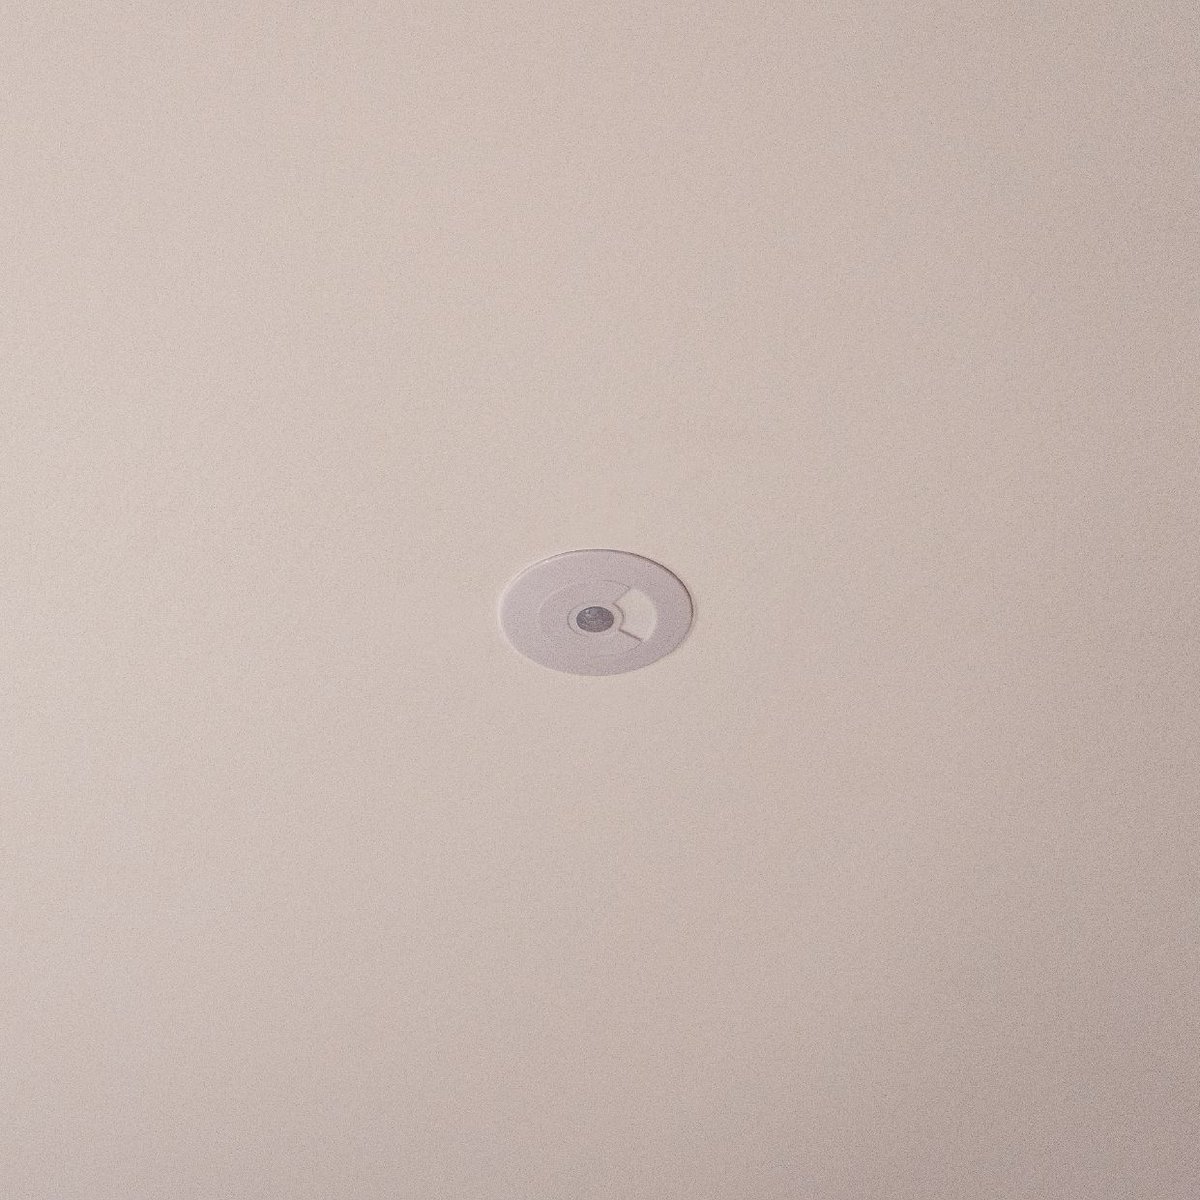 Subtle and stylish, the Motion Sensor 360 - Volt Free protrudes less than 3.5mm from the ceiling. #KNX #control4 #lutron #loxone #crestron #avtweeps #tech #ukmfg #smarterhomes #smarthometechnology #smarthome #lighting #integratedtechnology #smarttech #homeautomation #rti